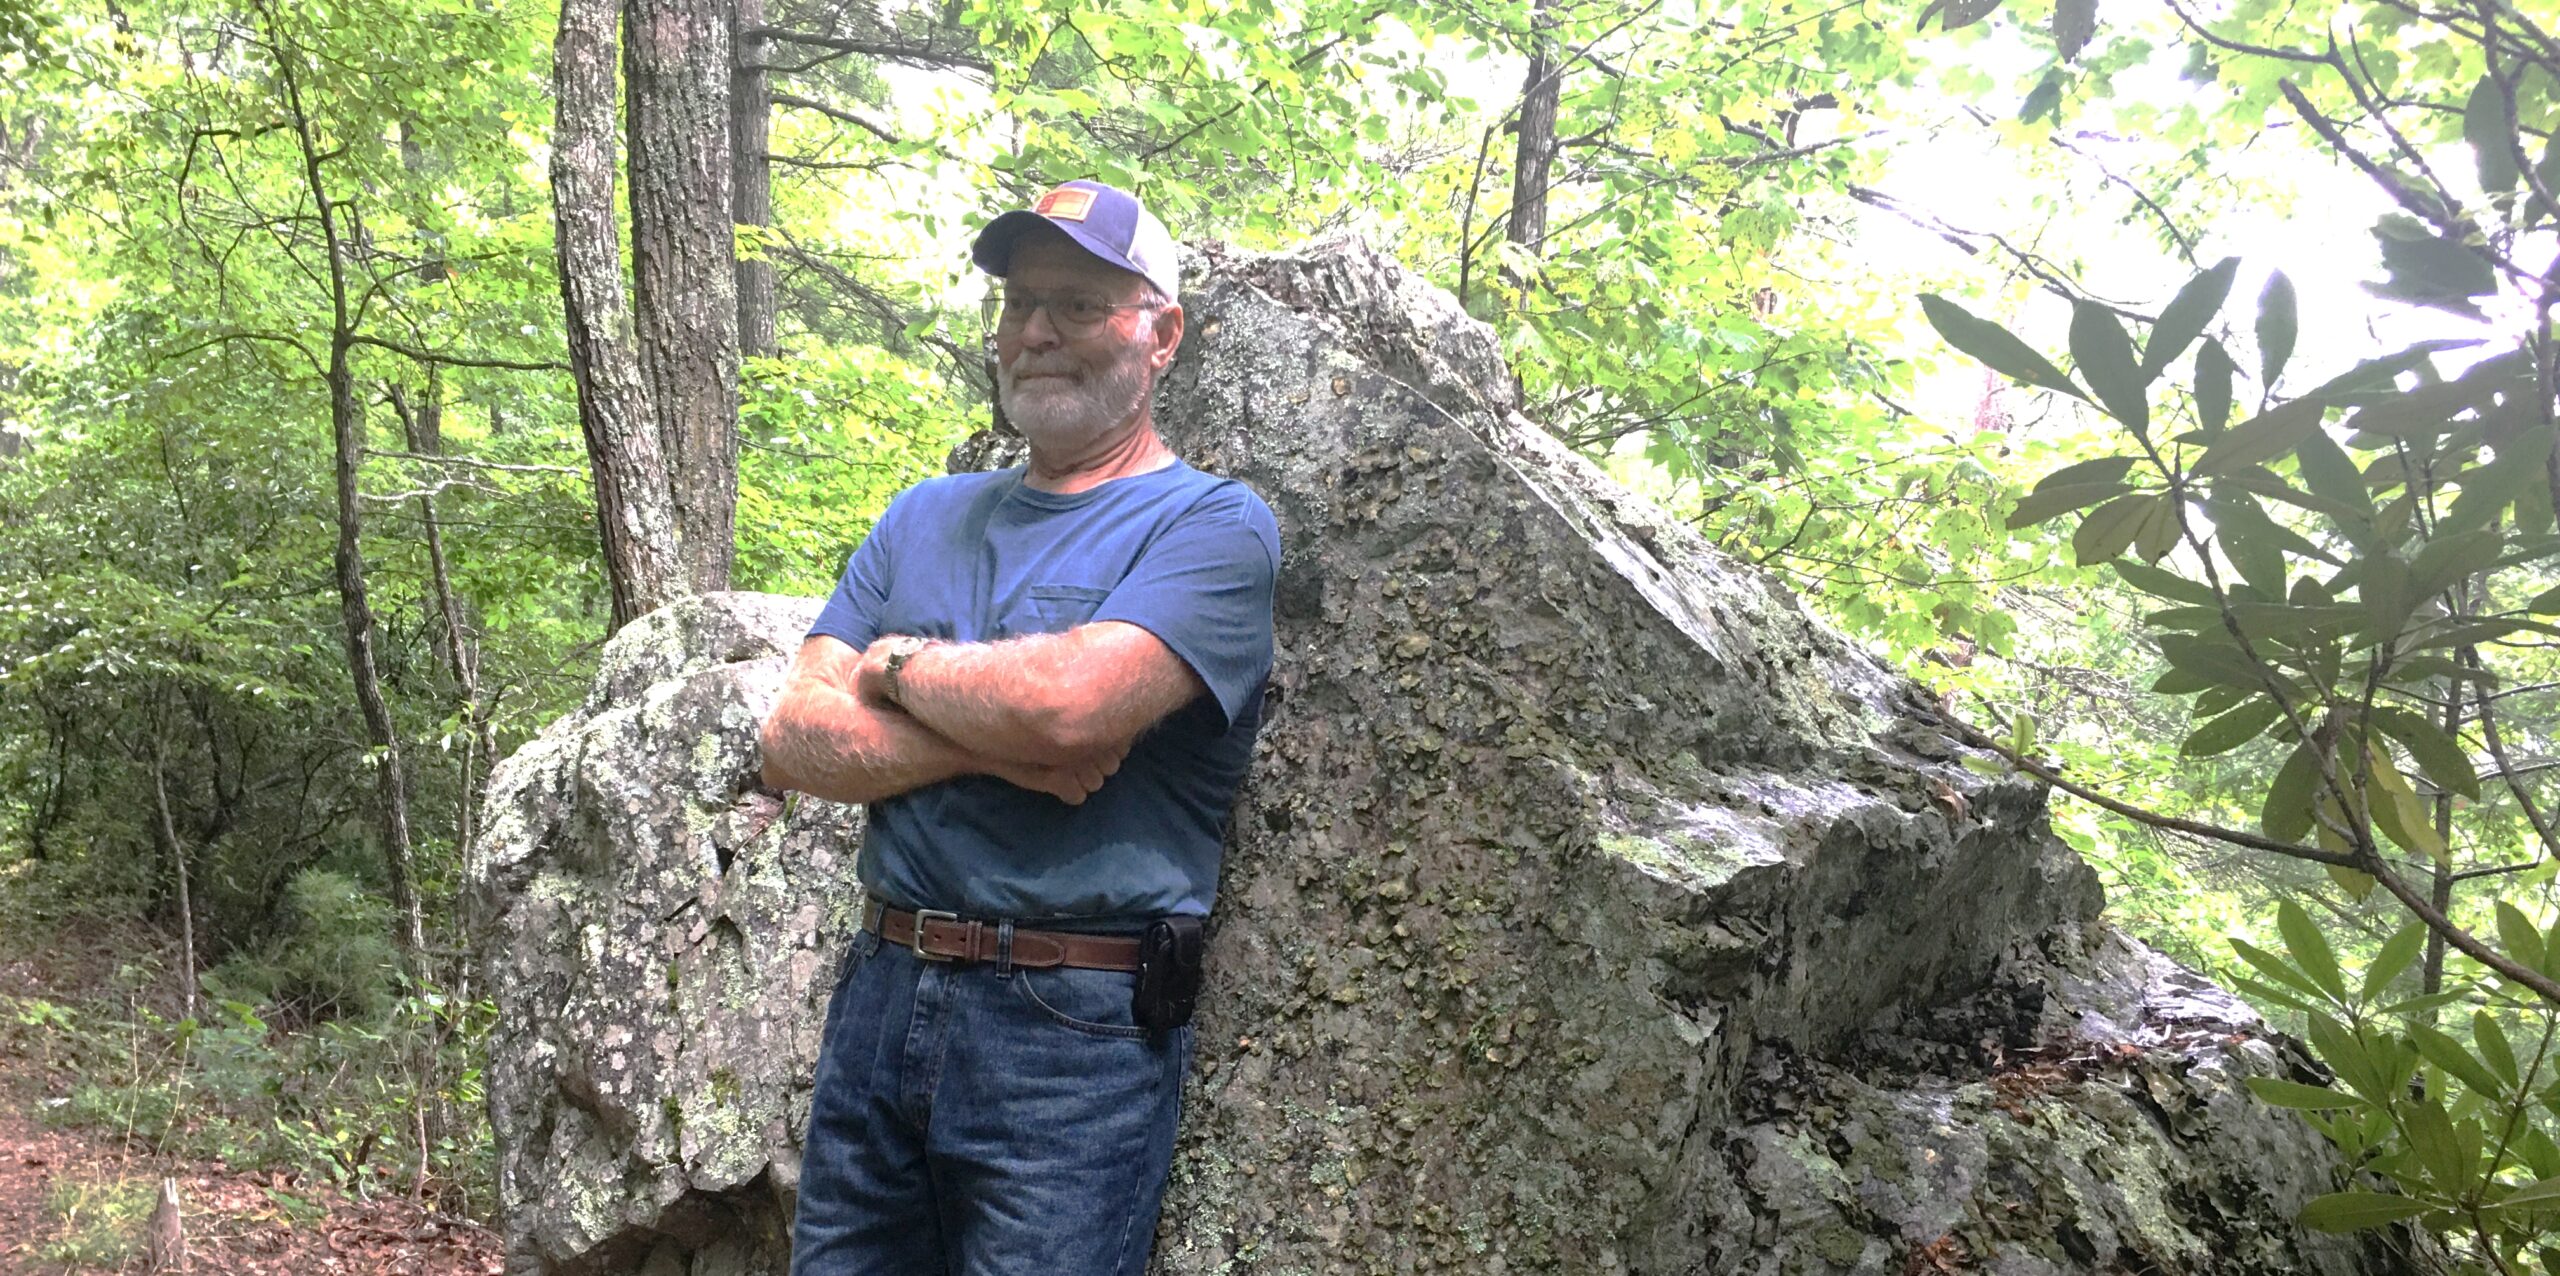 Glenn Honeycutt stands smiling in the forest.